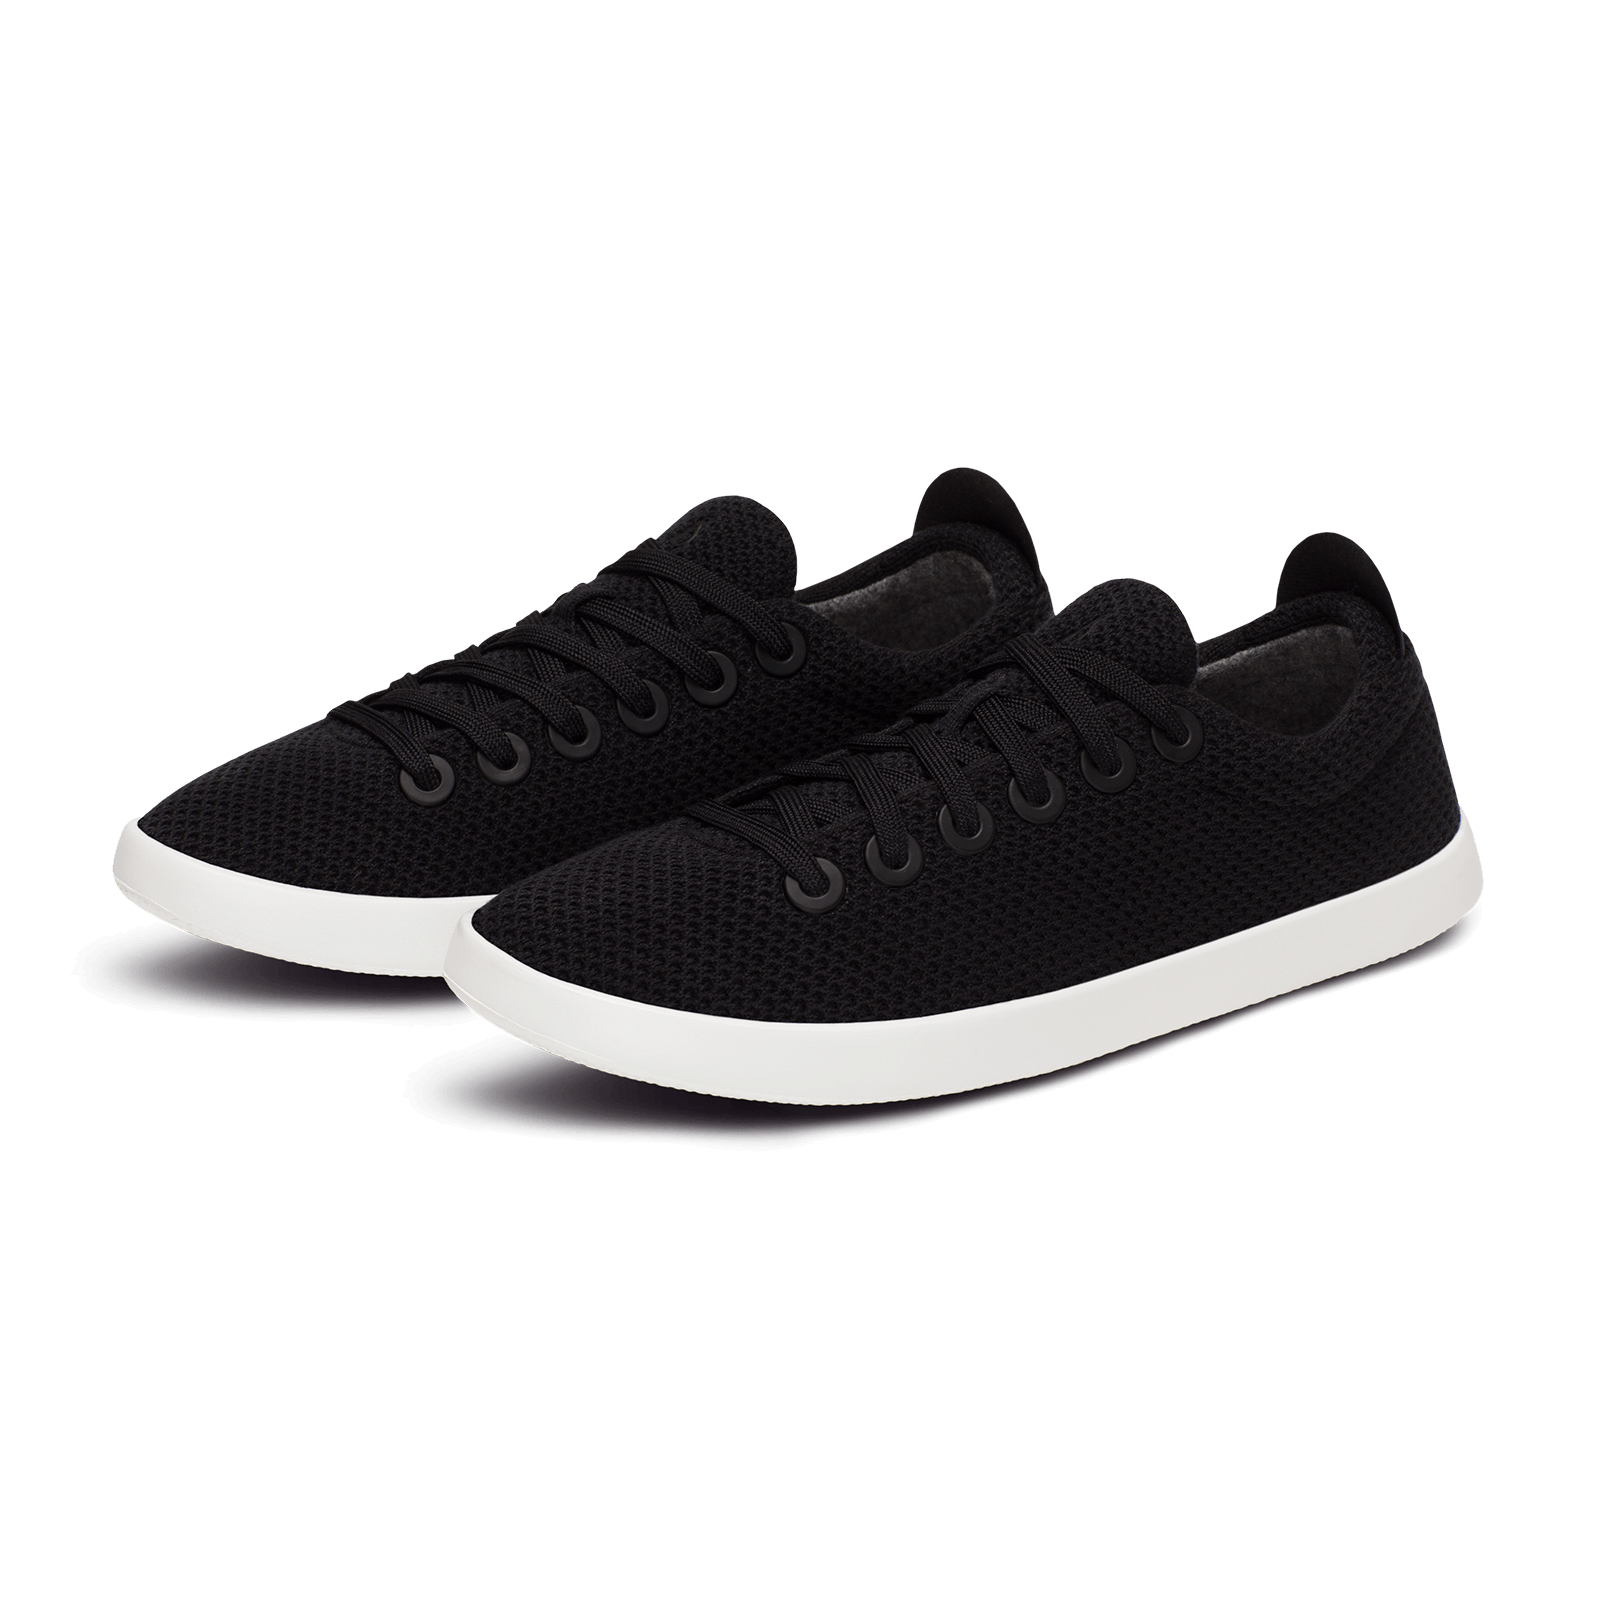 Women's Tree Pipers - Natural Black (Blizzard Sole) - Allbirds Canada